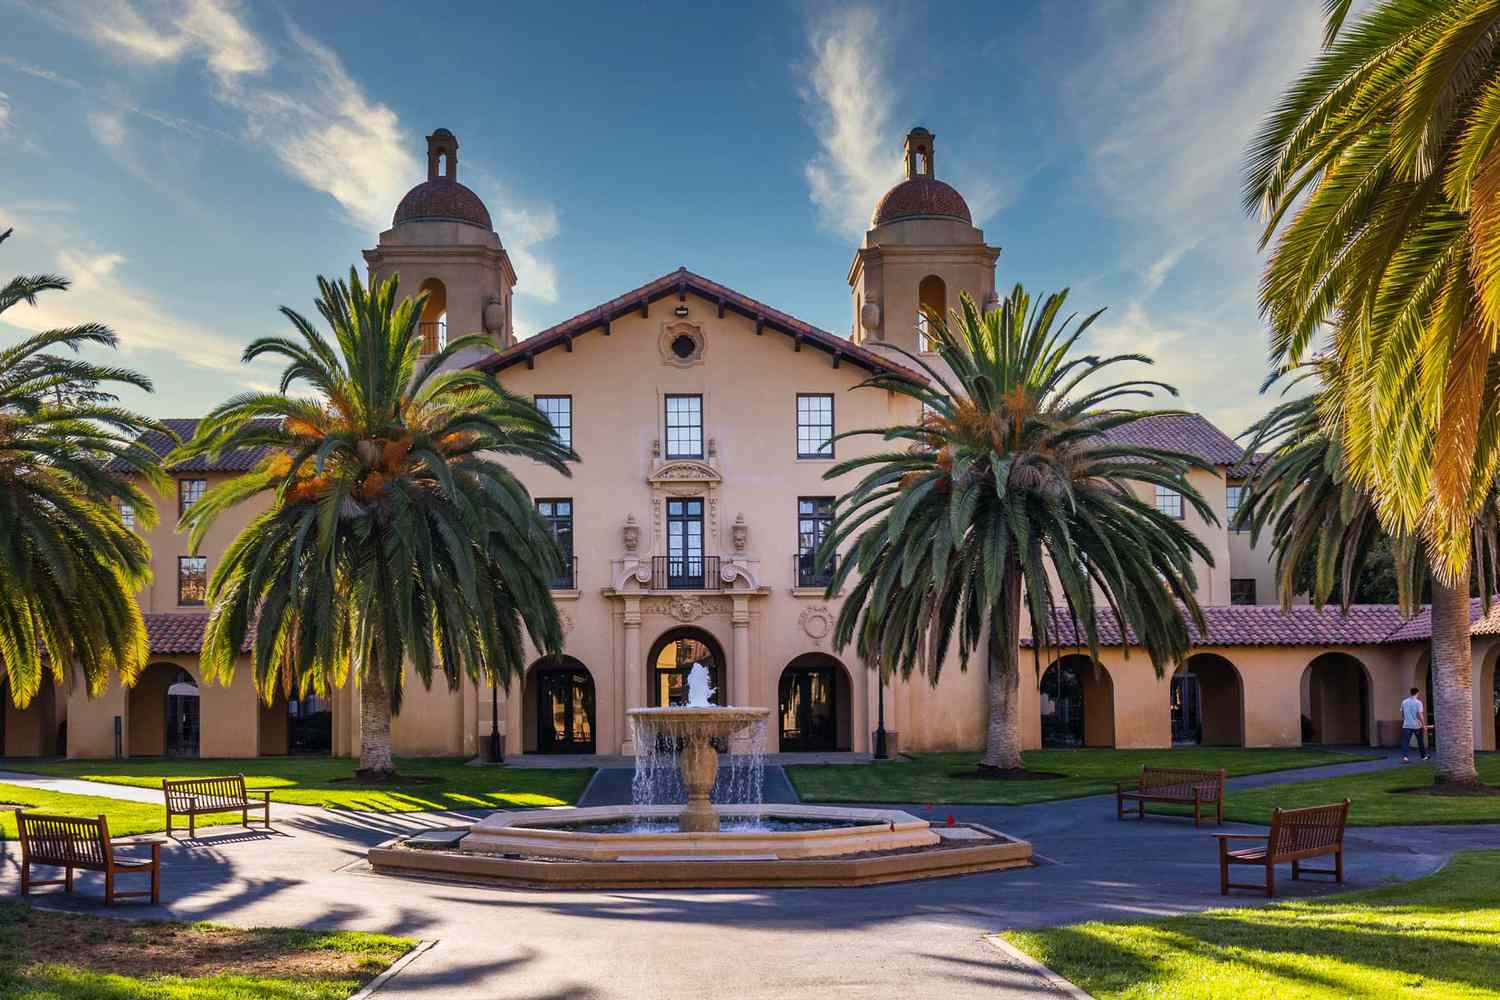 Campus buildings and hallways of the Stanford University